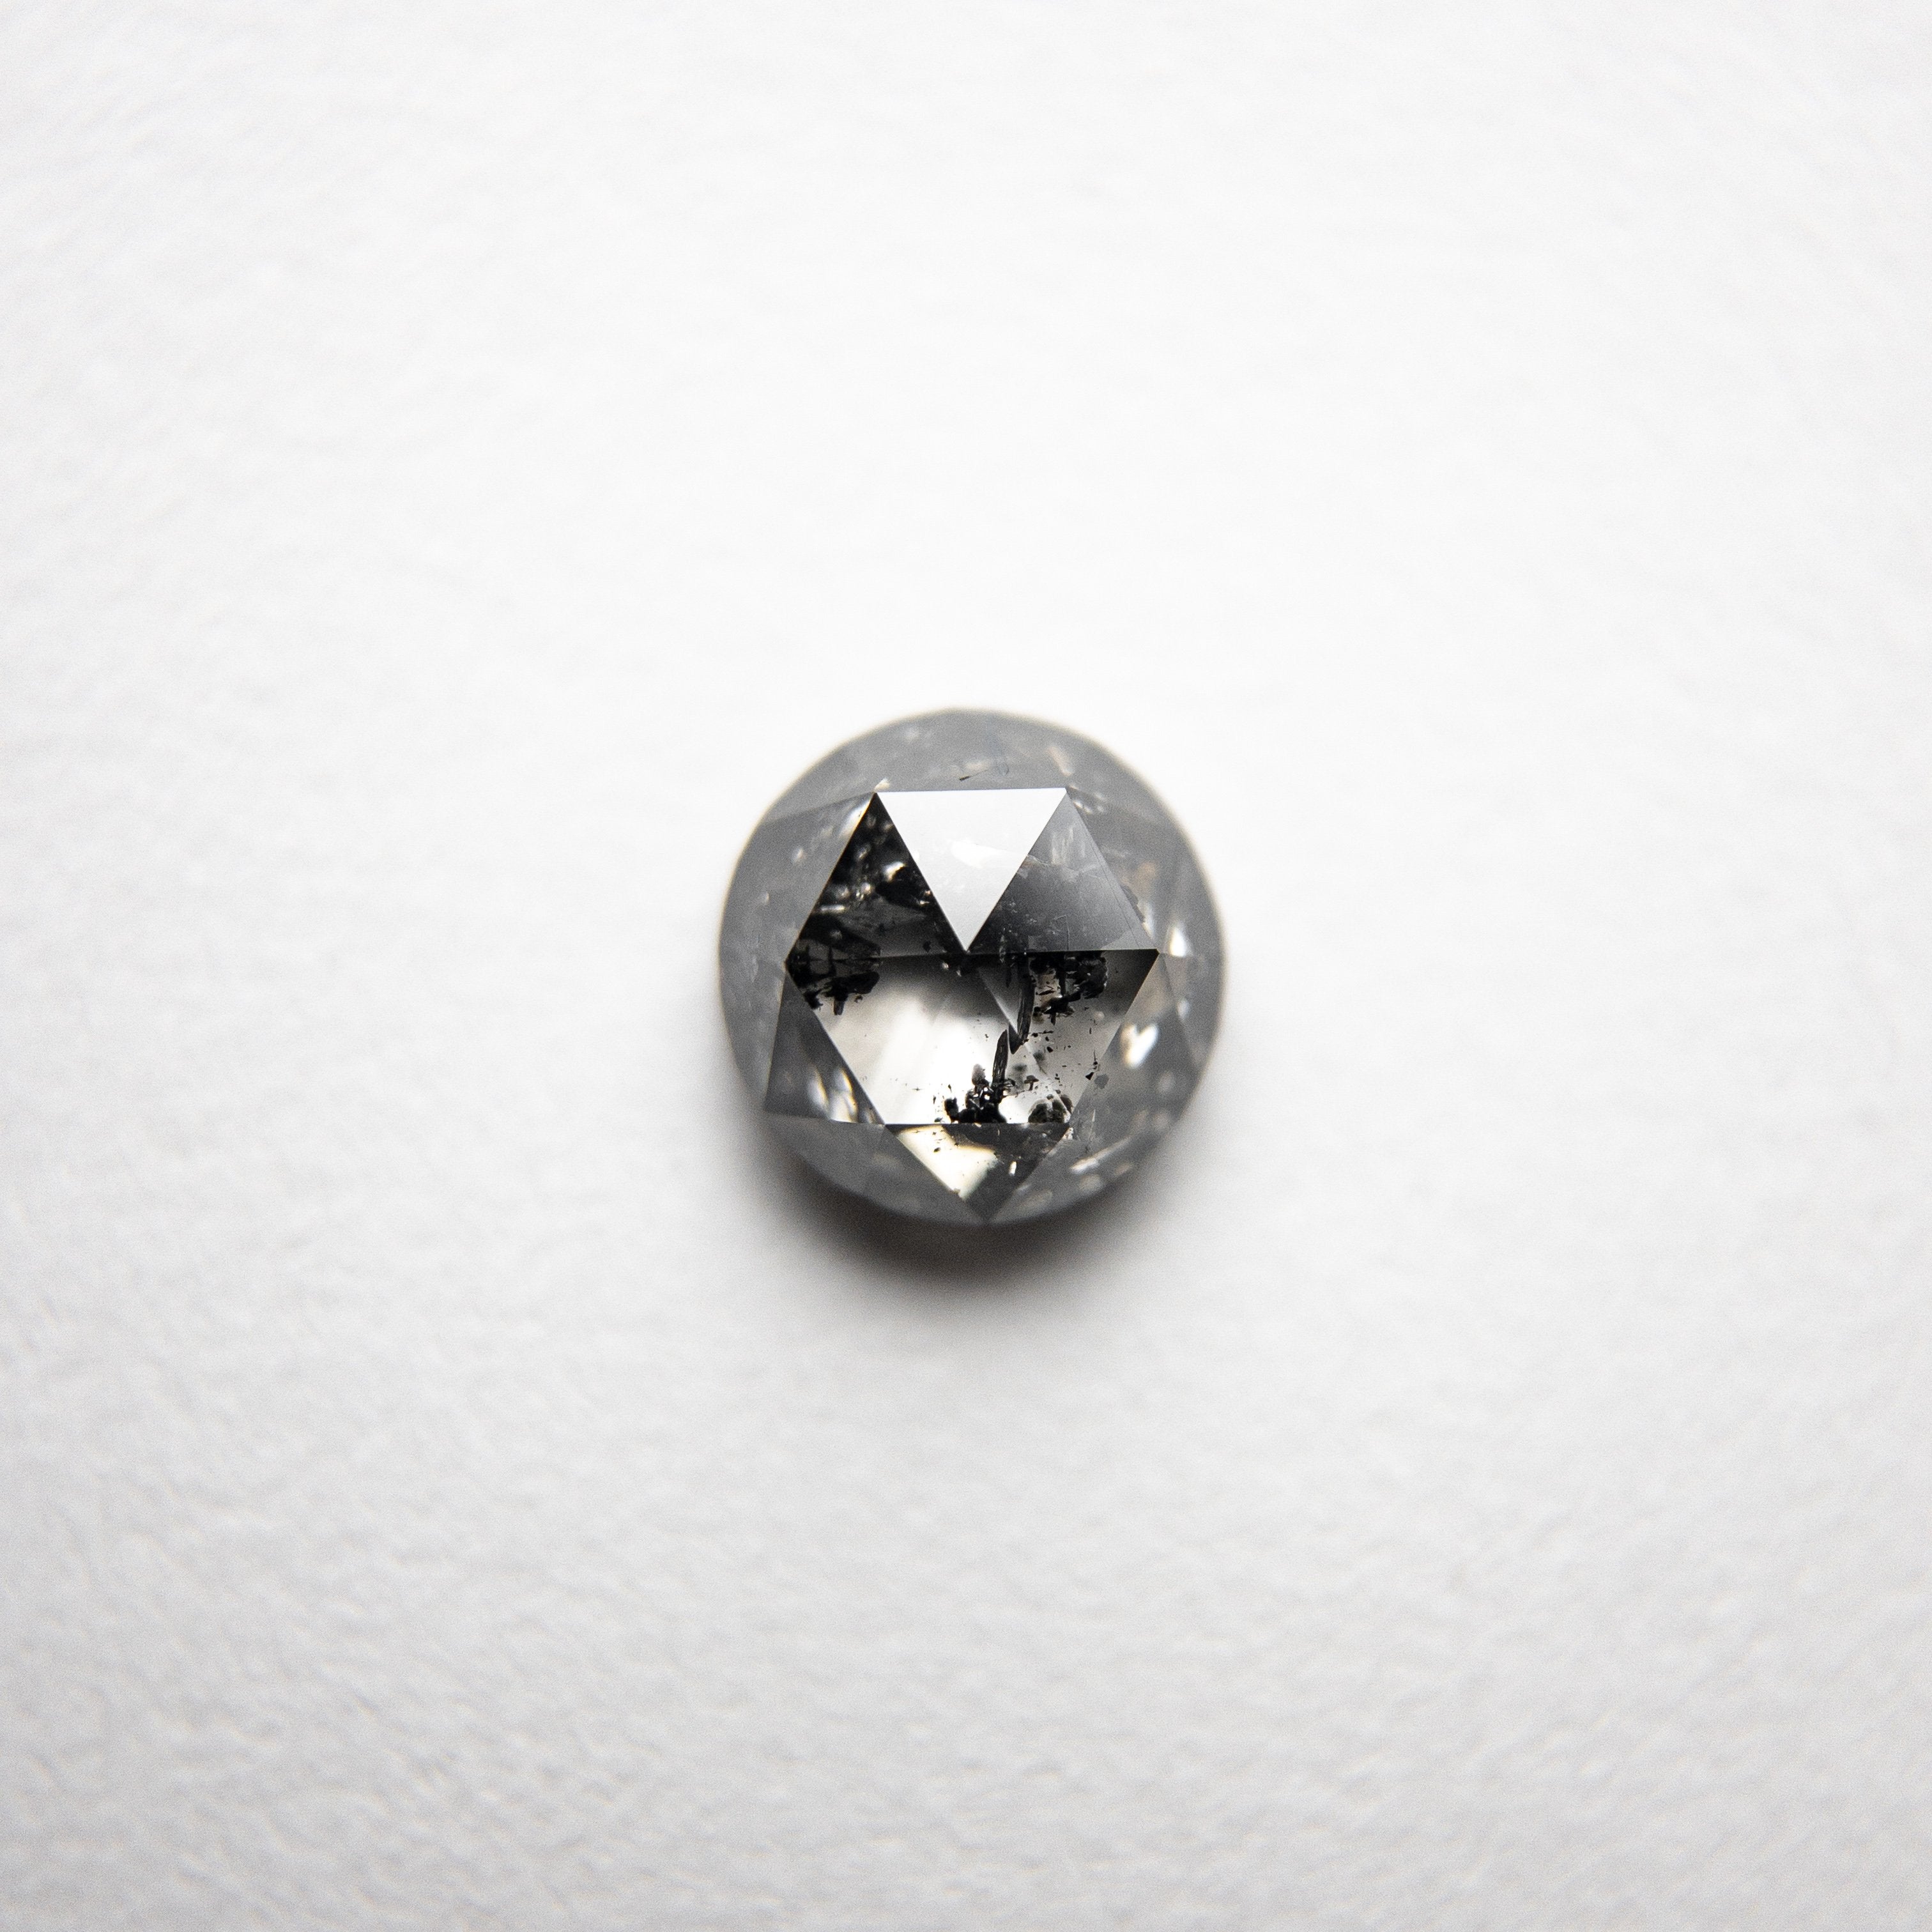 0.63ct 5.10x5.07x2.38mm Round Rosecut 18227-12 HOLD D880 7/20/20